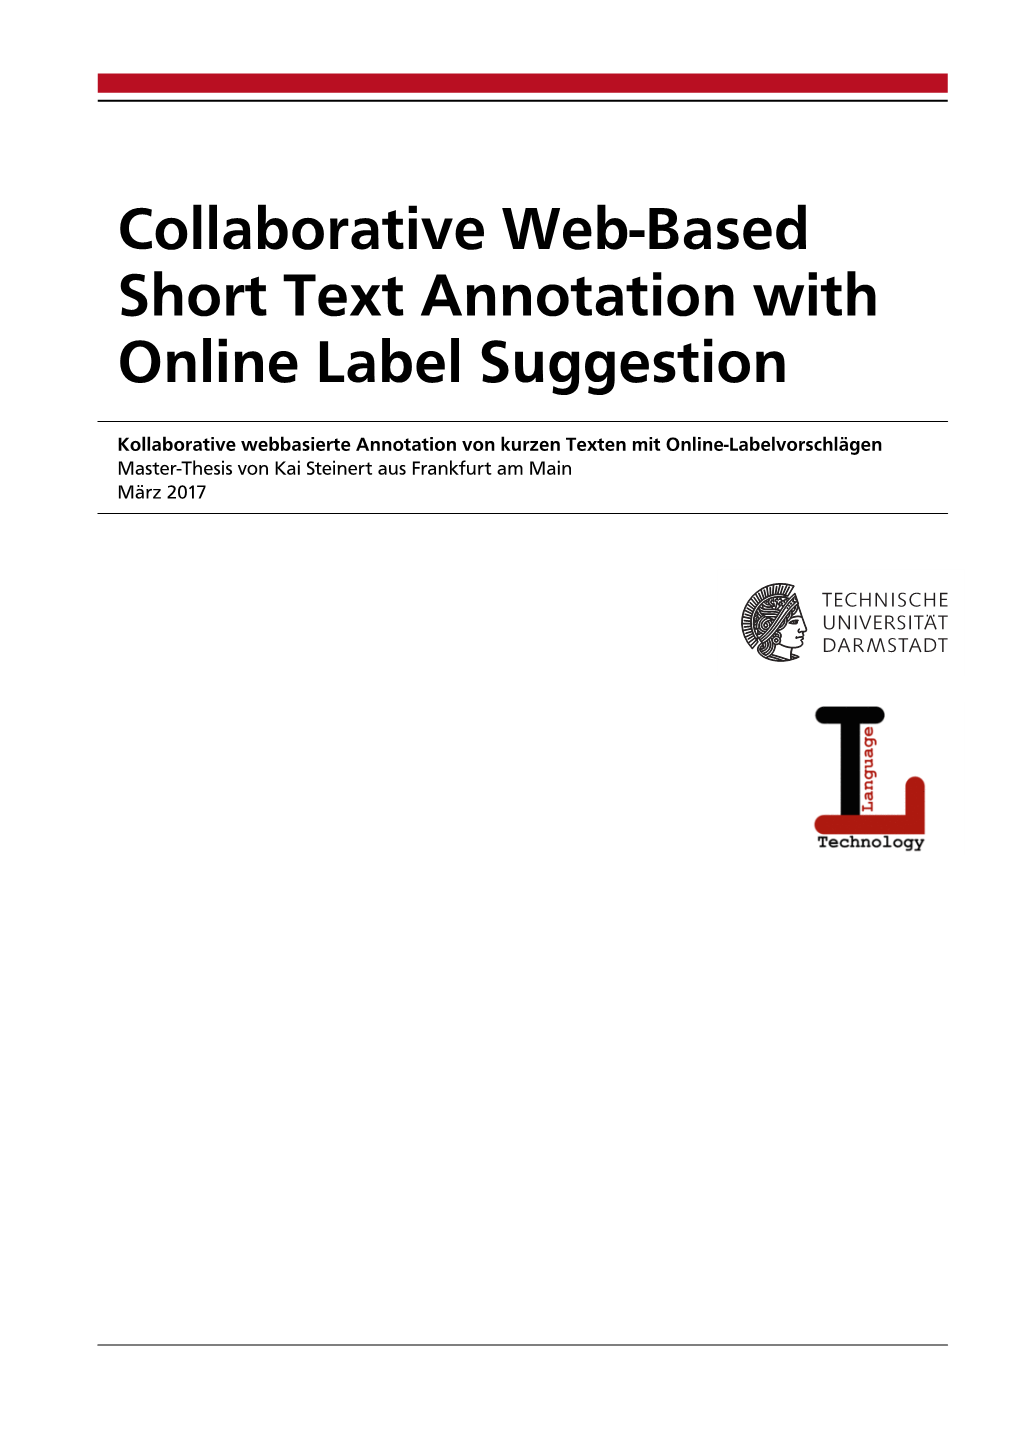 Collaborative Web-Based Short Text Annotation with Online Label Suggestion